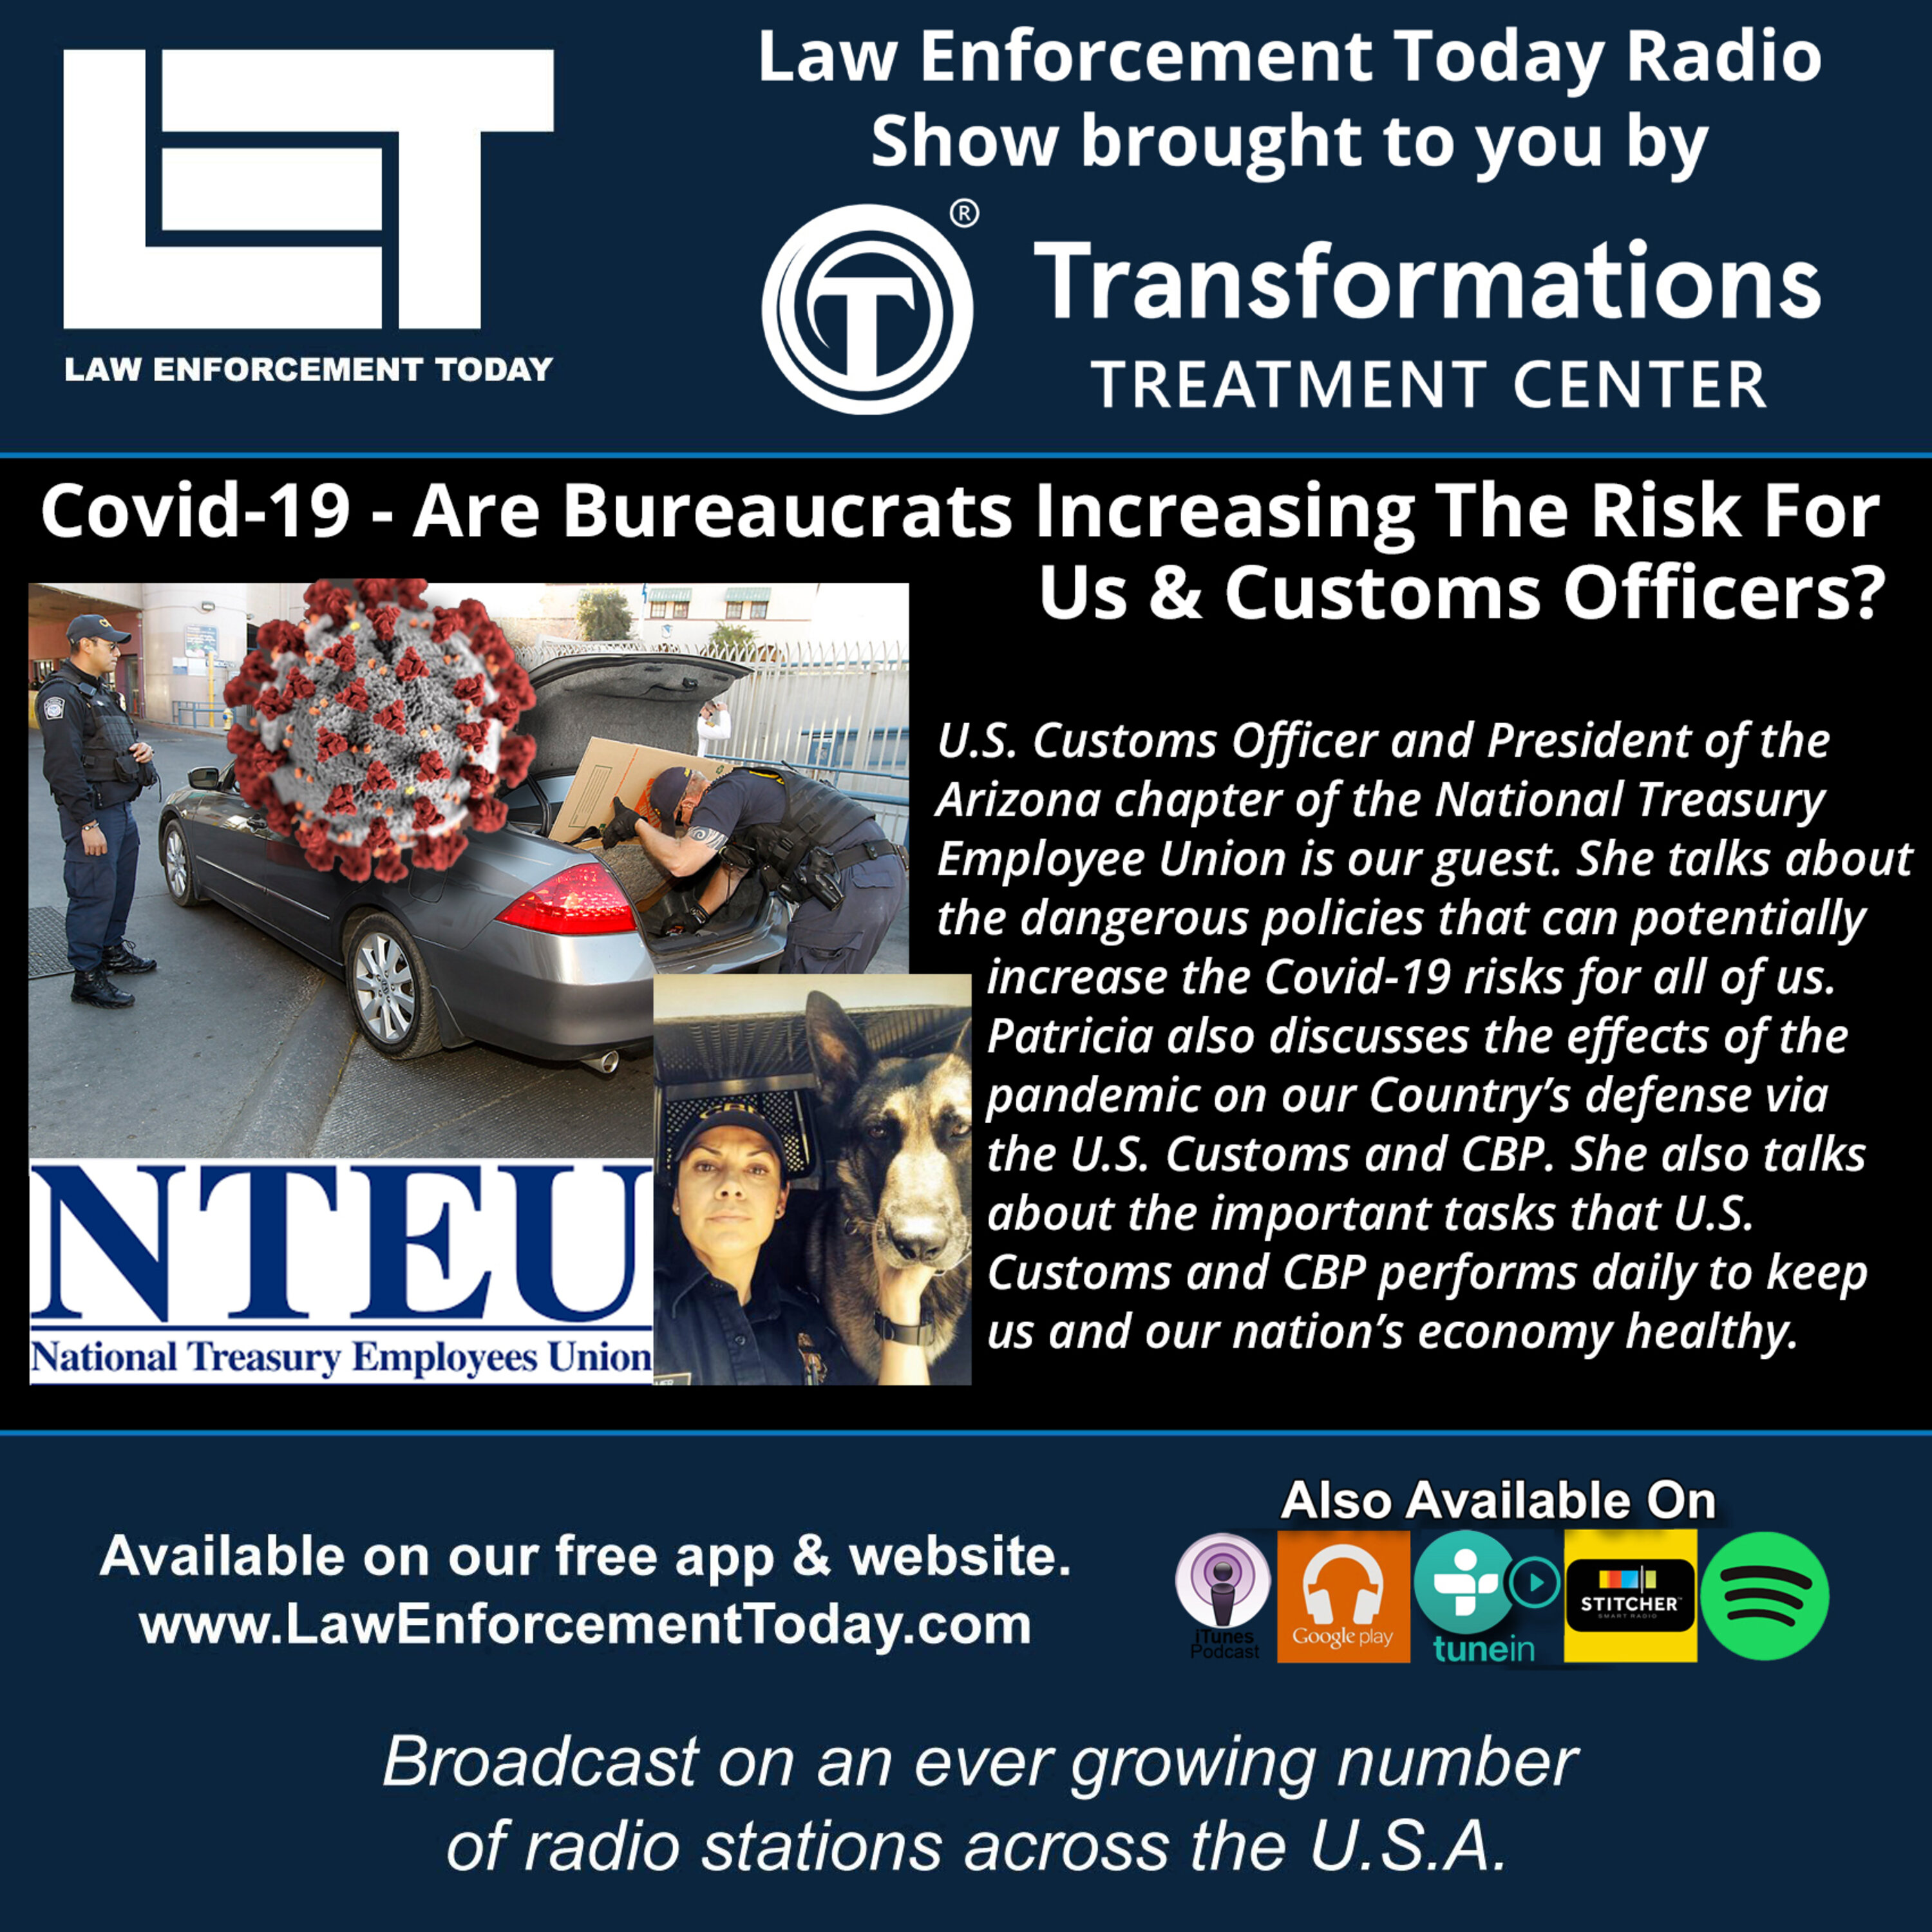 S4E29: Covid-19 - Are Bureaucrats Increasing The Risk For Us & Customs Officers?